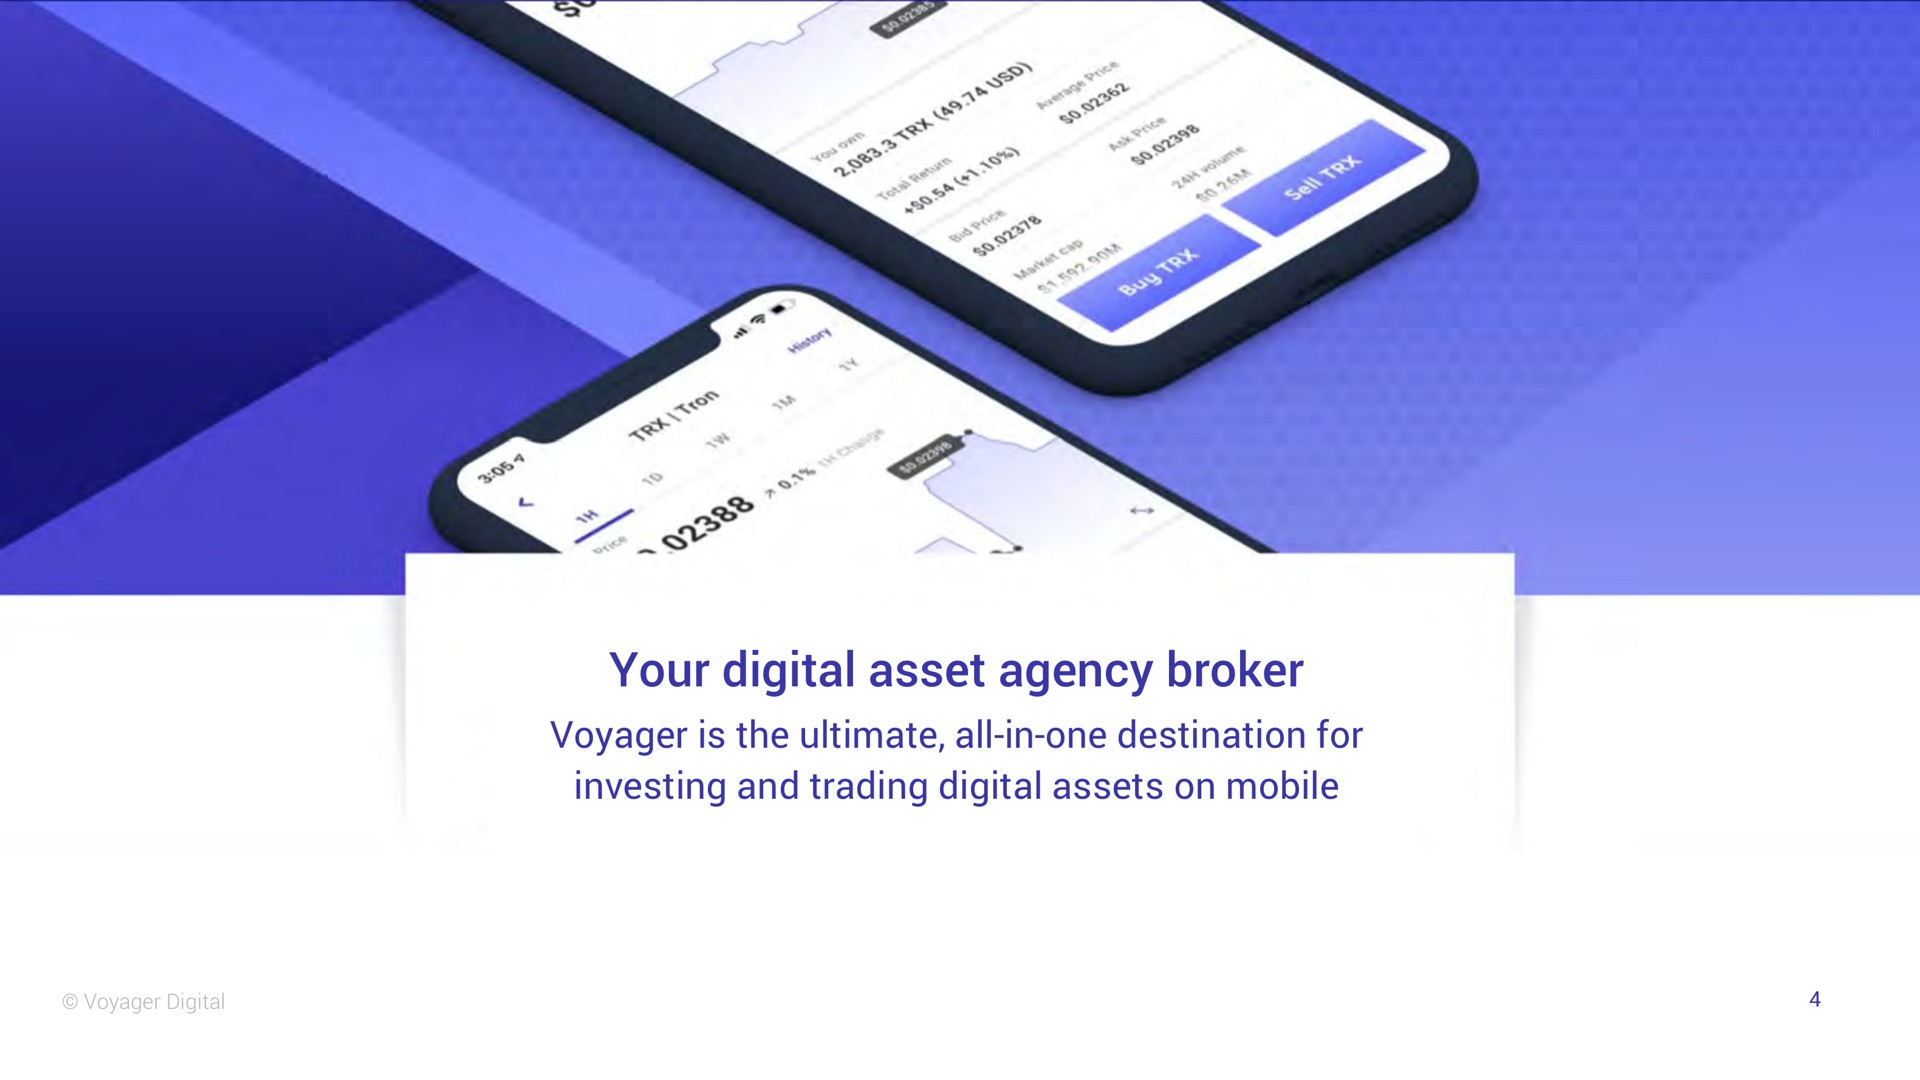 your digital asset agency broker voyager is the ultimate all in one destination for investing and trading digital assets on mobile | Voyager Digital